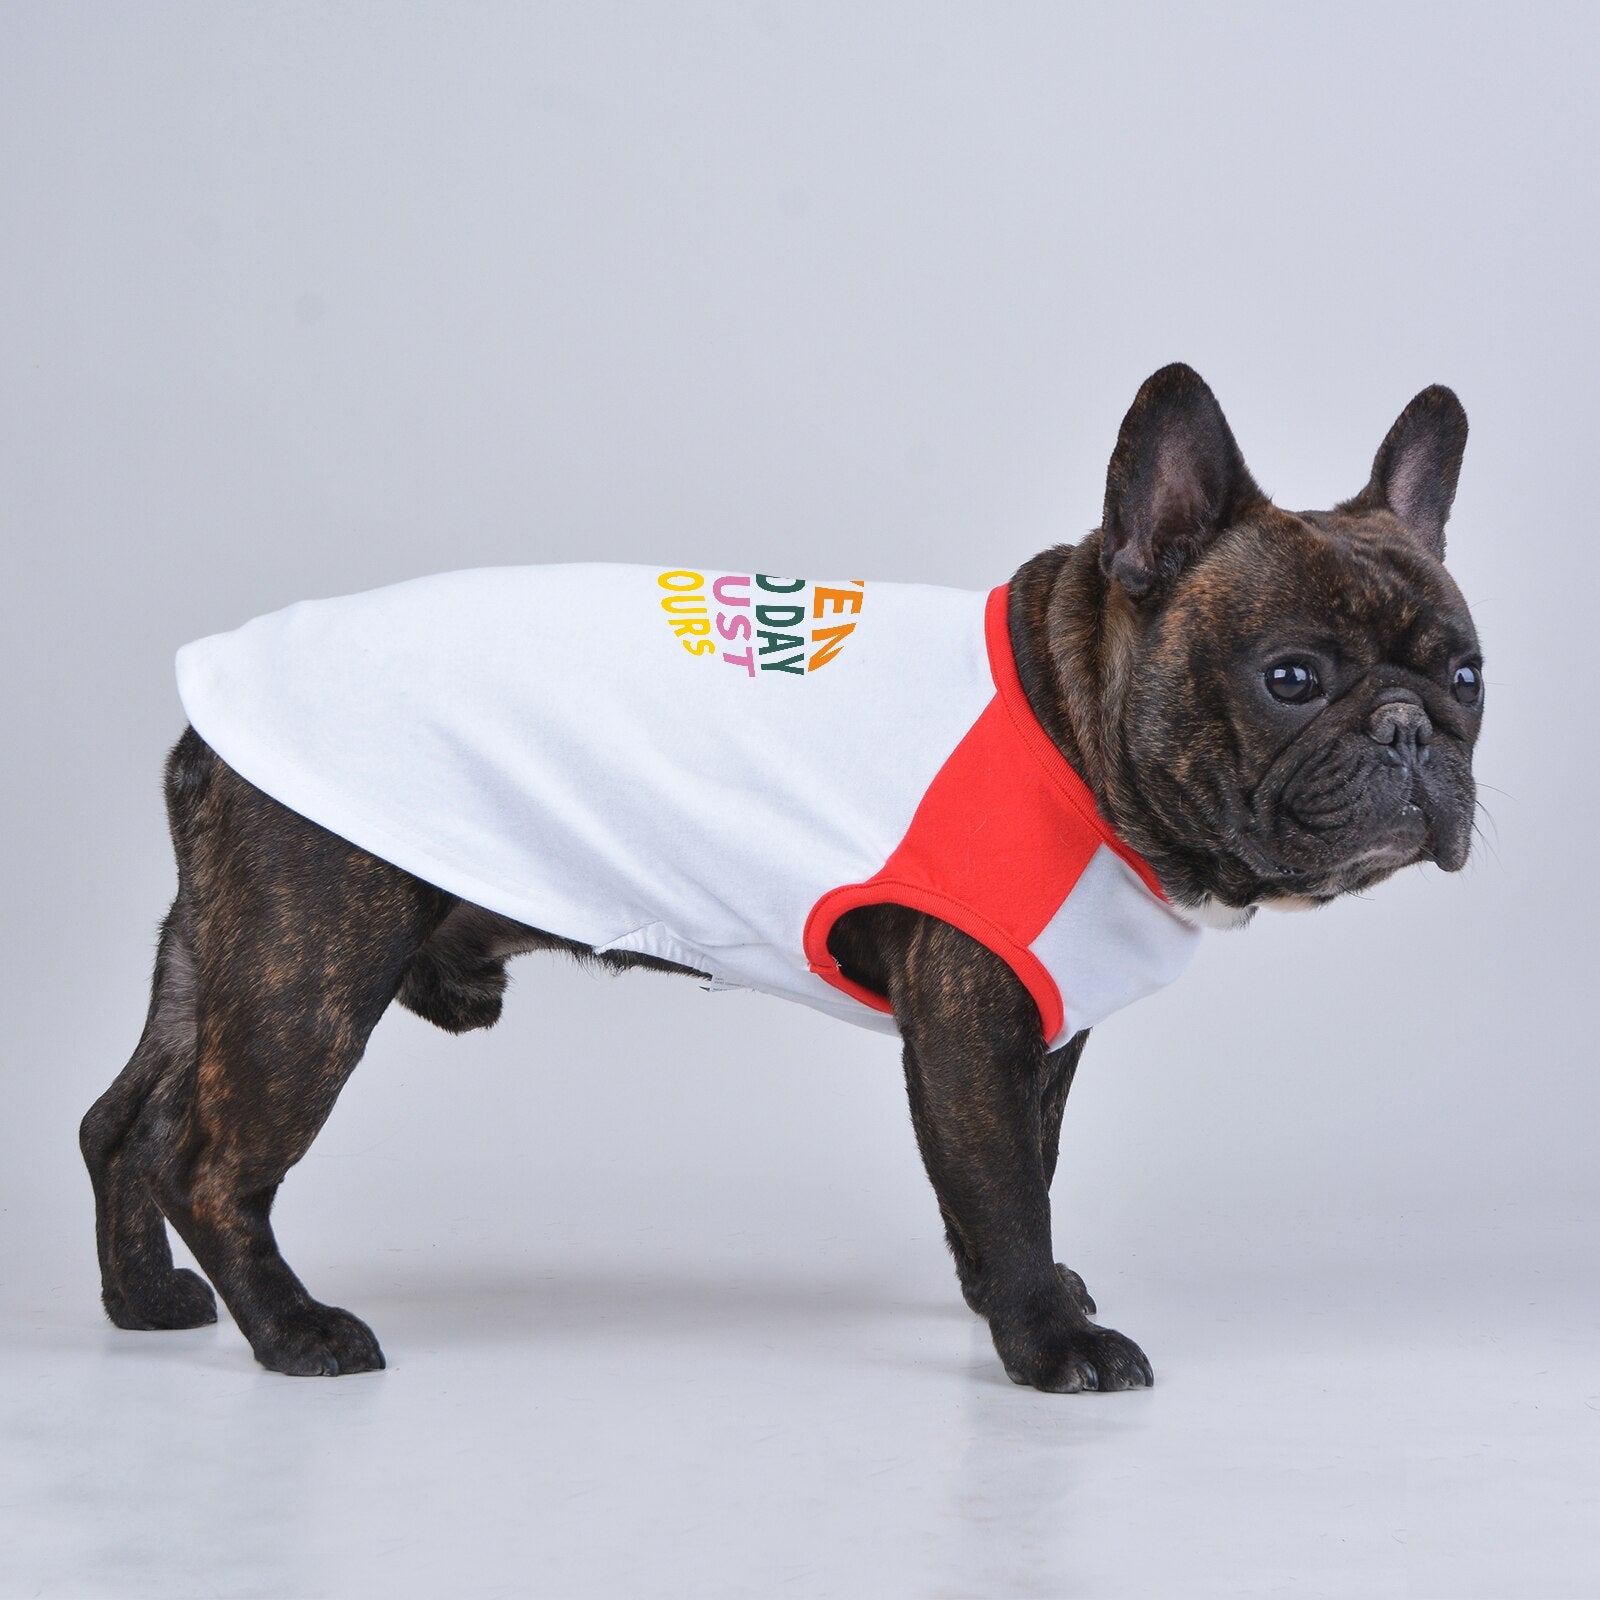 Printed Pet Clothes Vest Sleveless Tee Tshirt, Cute Classic Apparel for Dogs and Cats in All Sizes and Ages, Soft and Durable